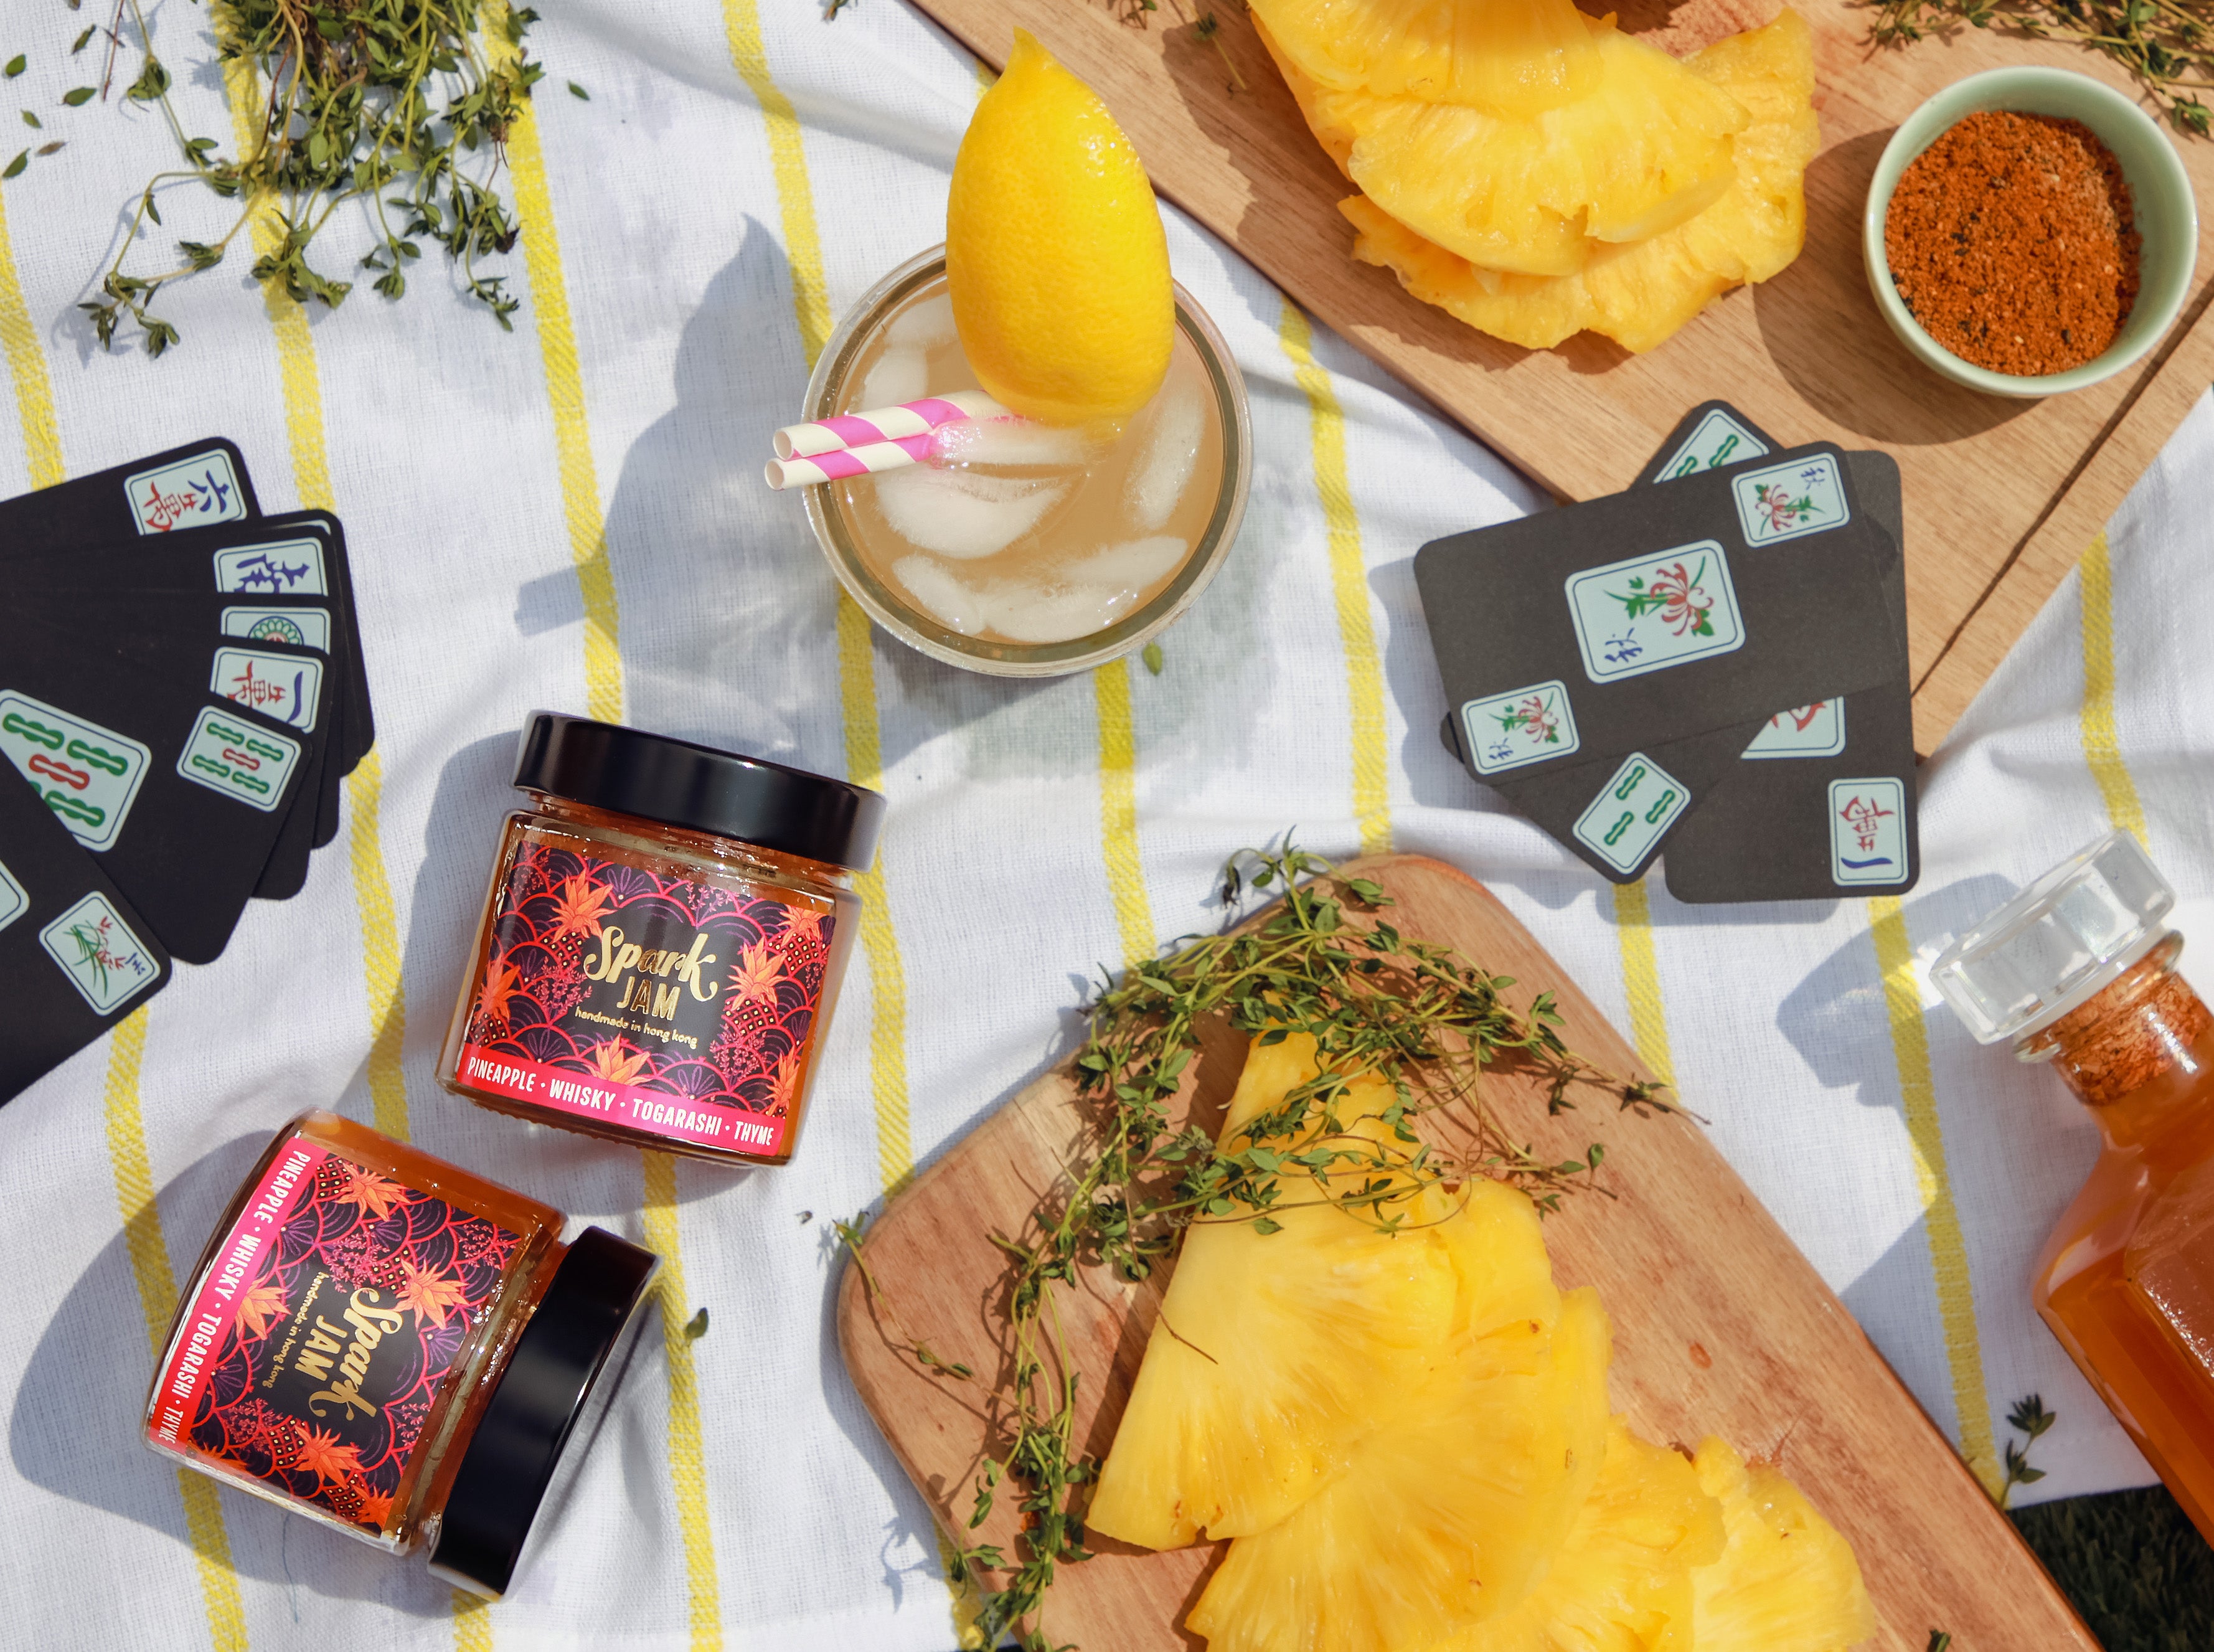 Spark Pineapple Jam with Whisky